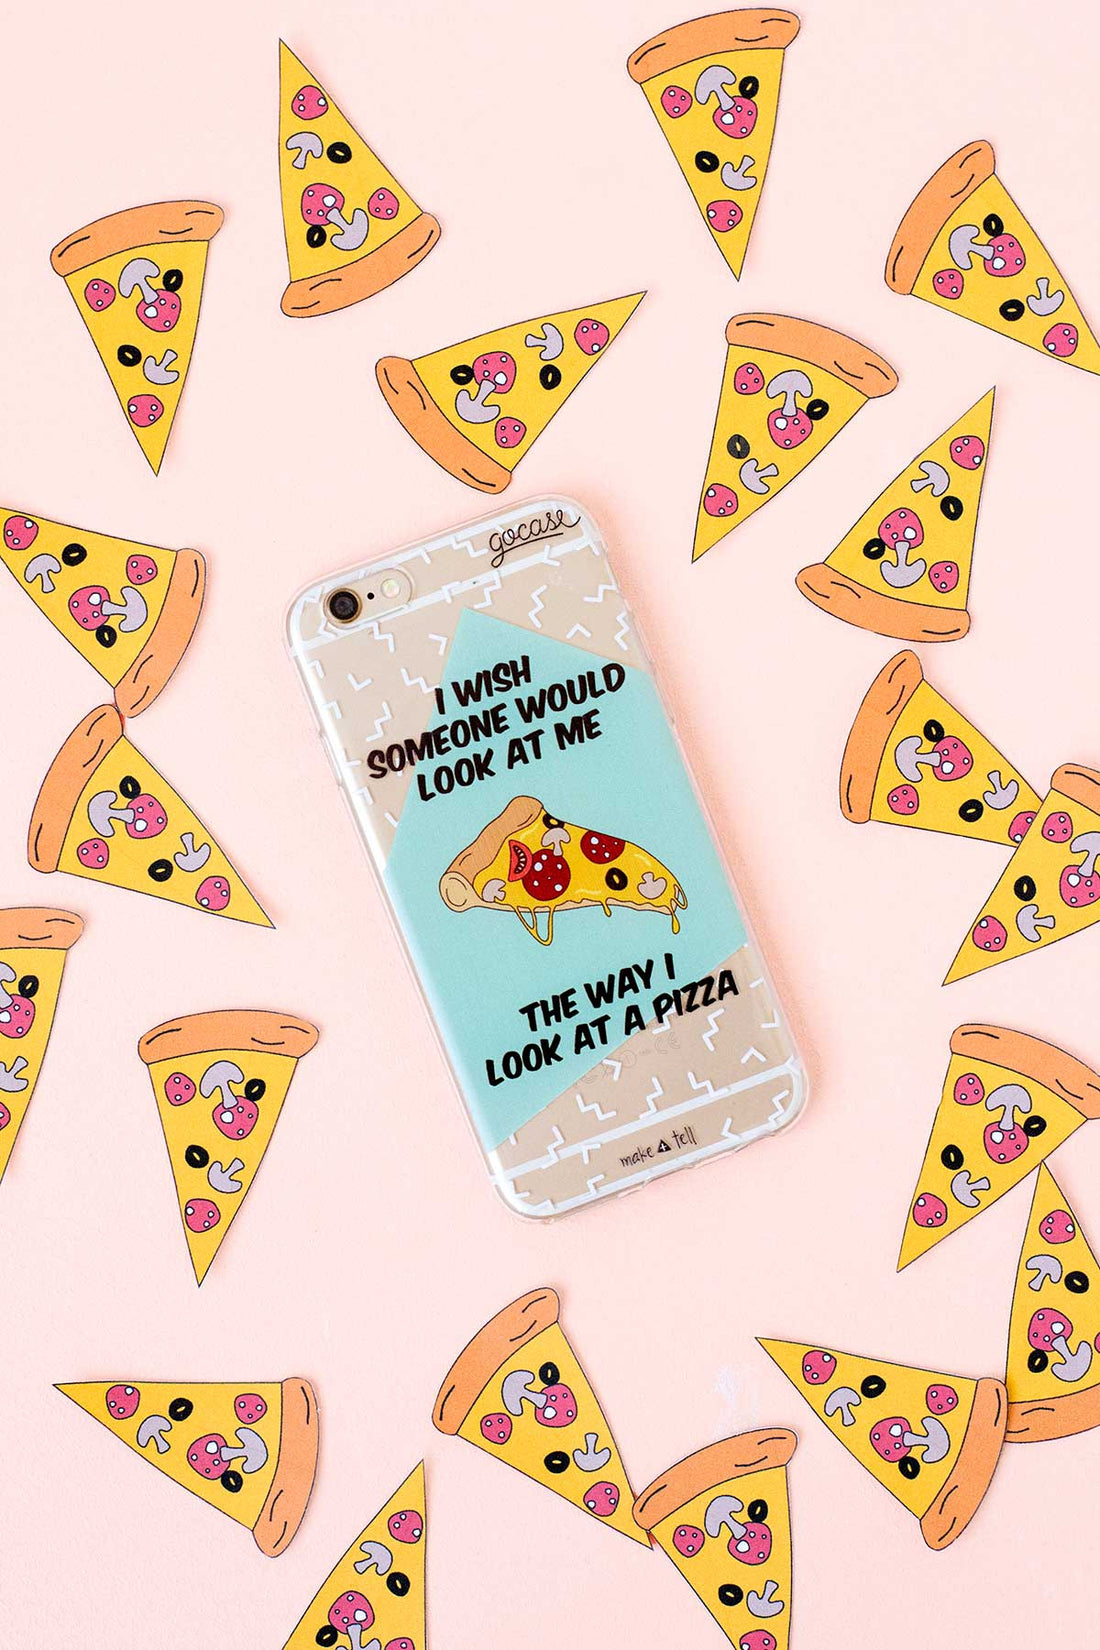 Introducing our pizza phone case!